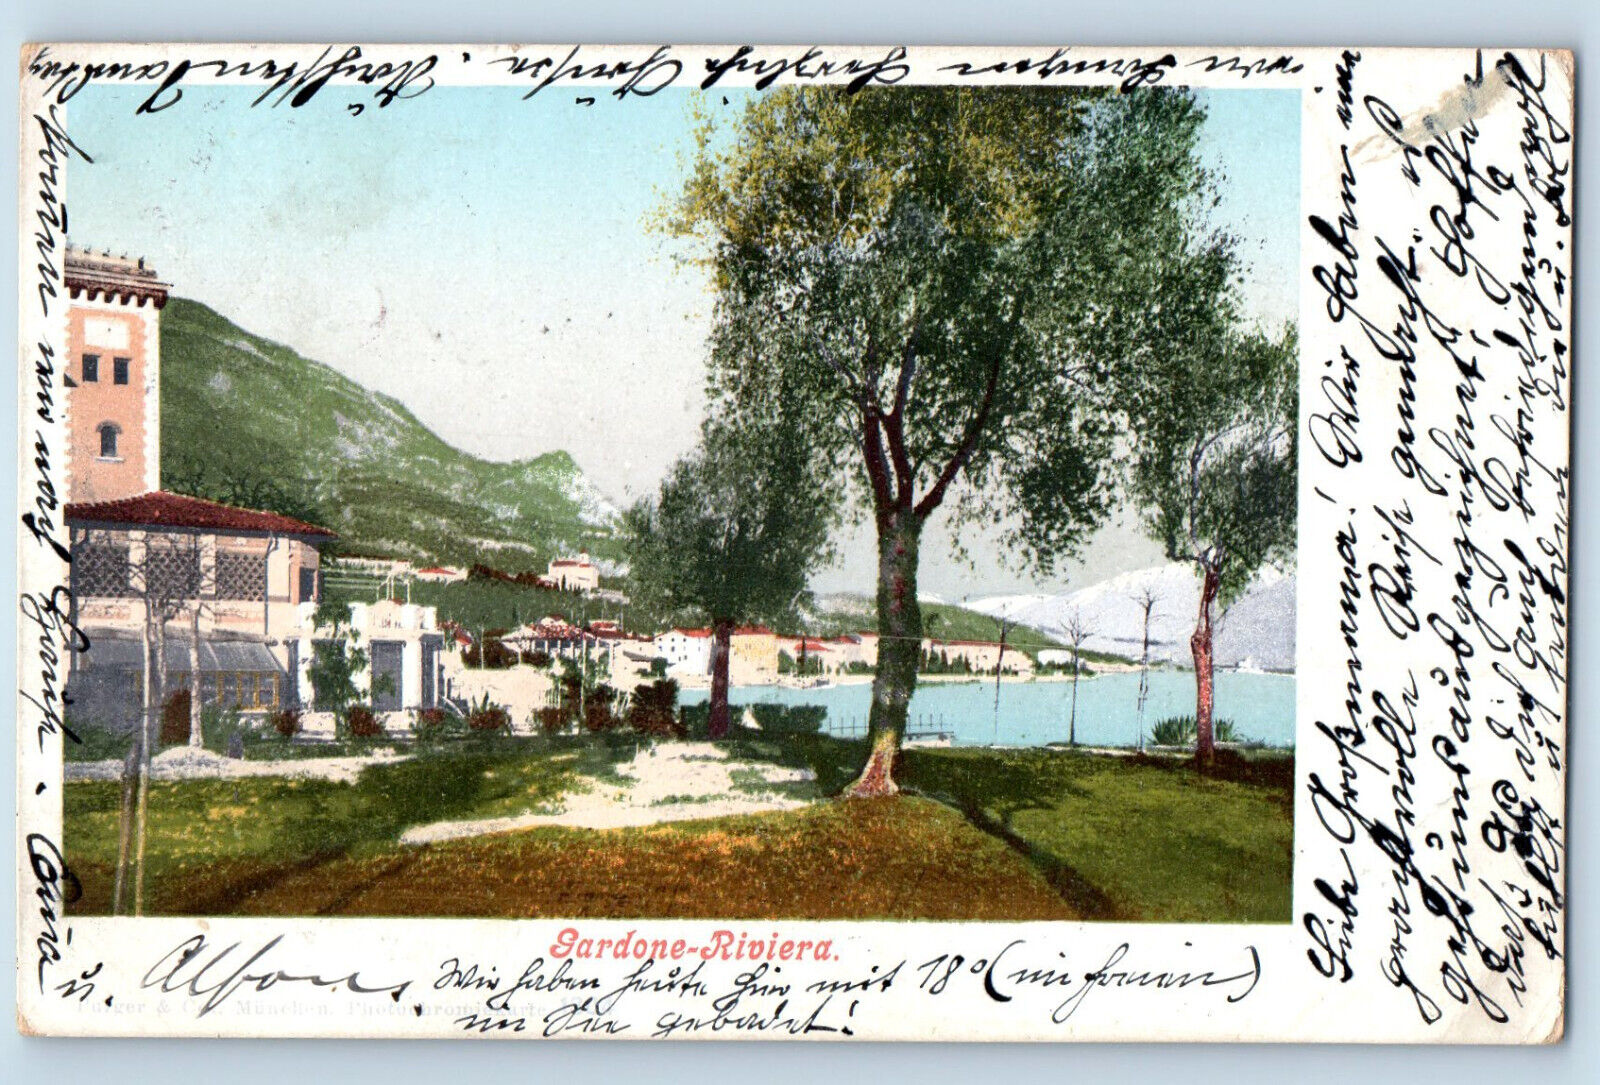 Brescia Lombardy Italy Postcard View of Gardone-Riviera 1902 Posted Antique